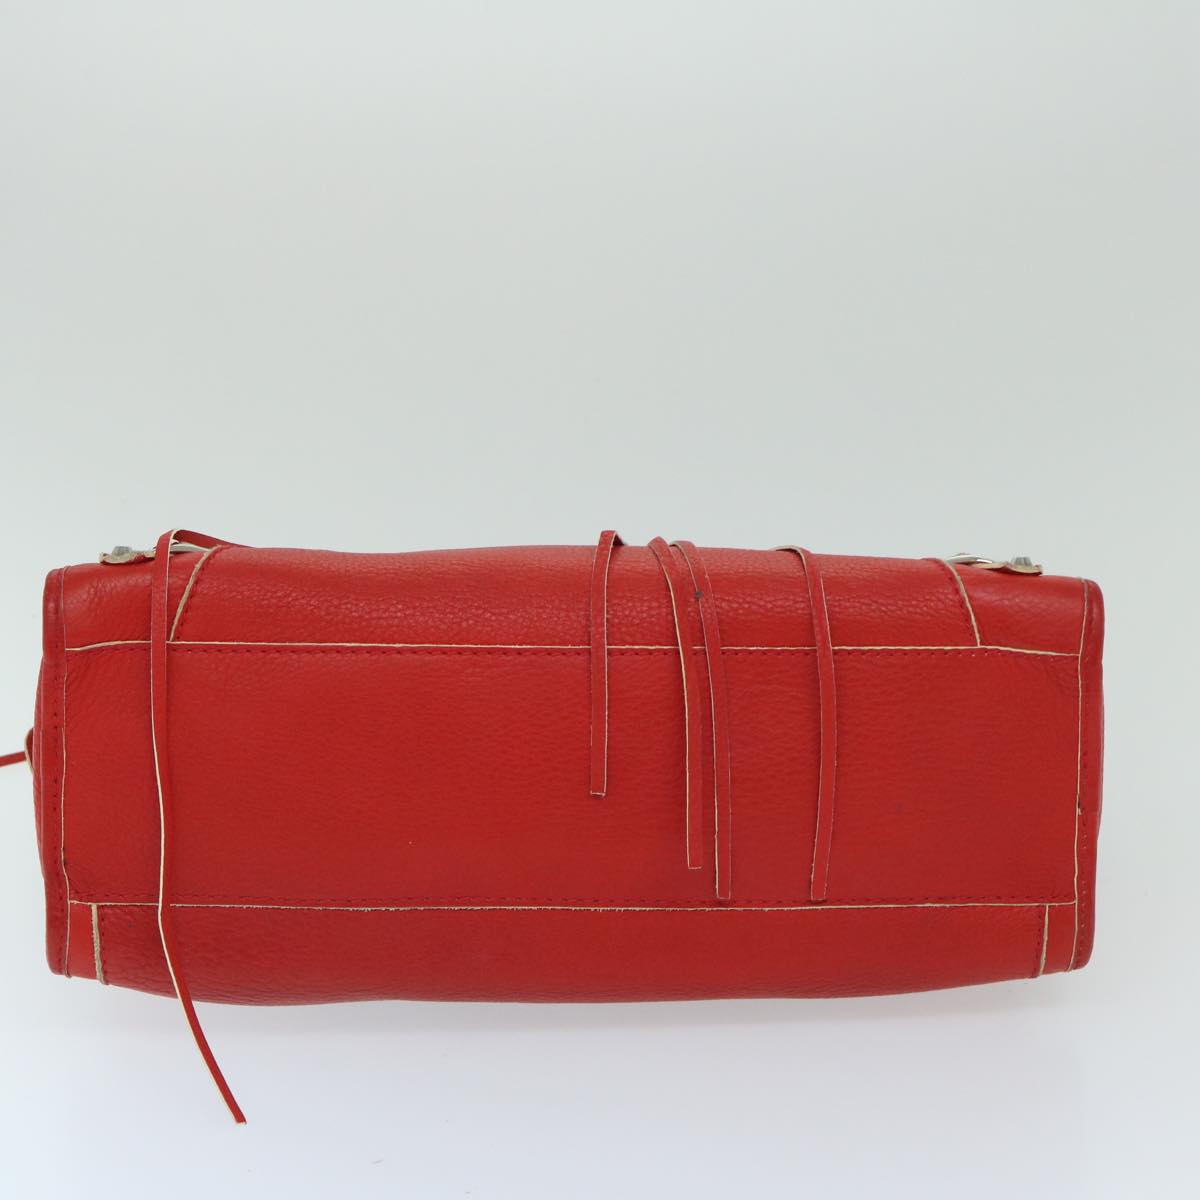 BALENCIAGA City Hand Bag Leather 2way Red 115748 Auth bs12559